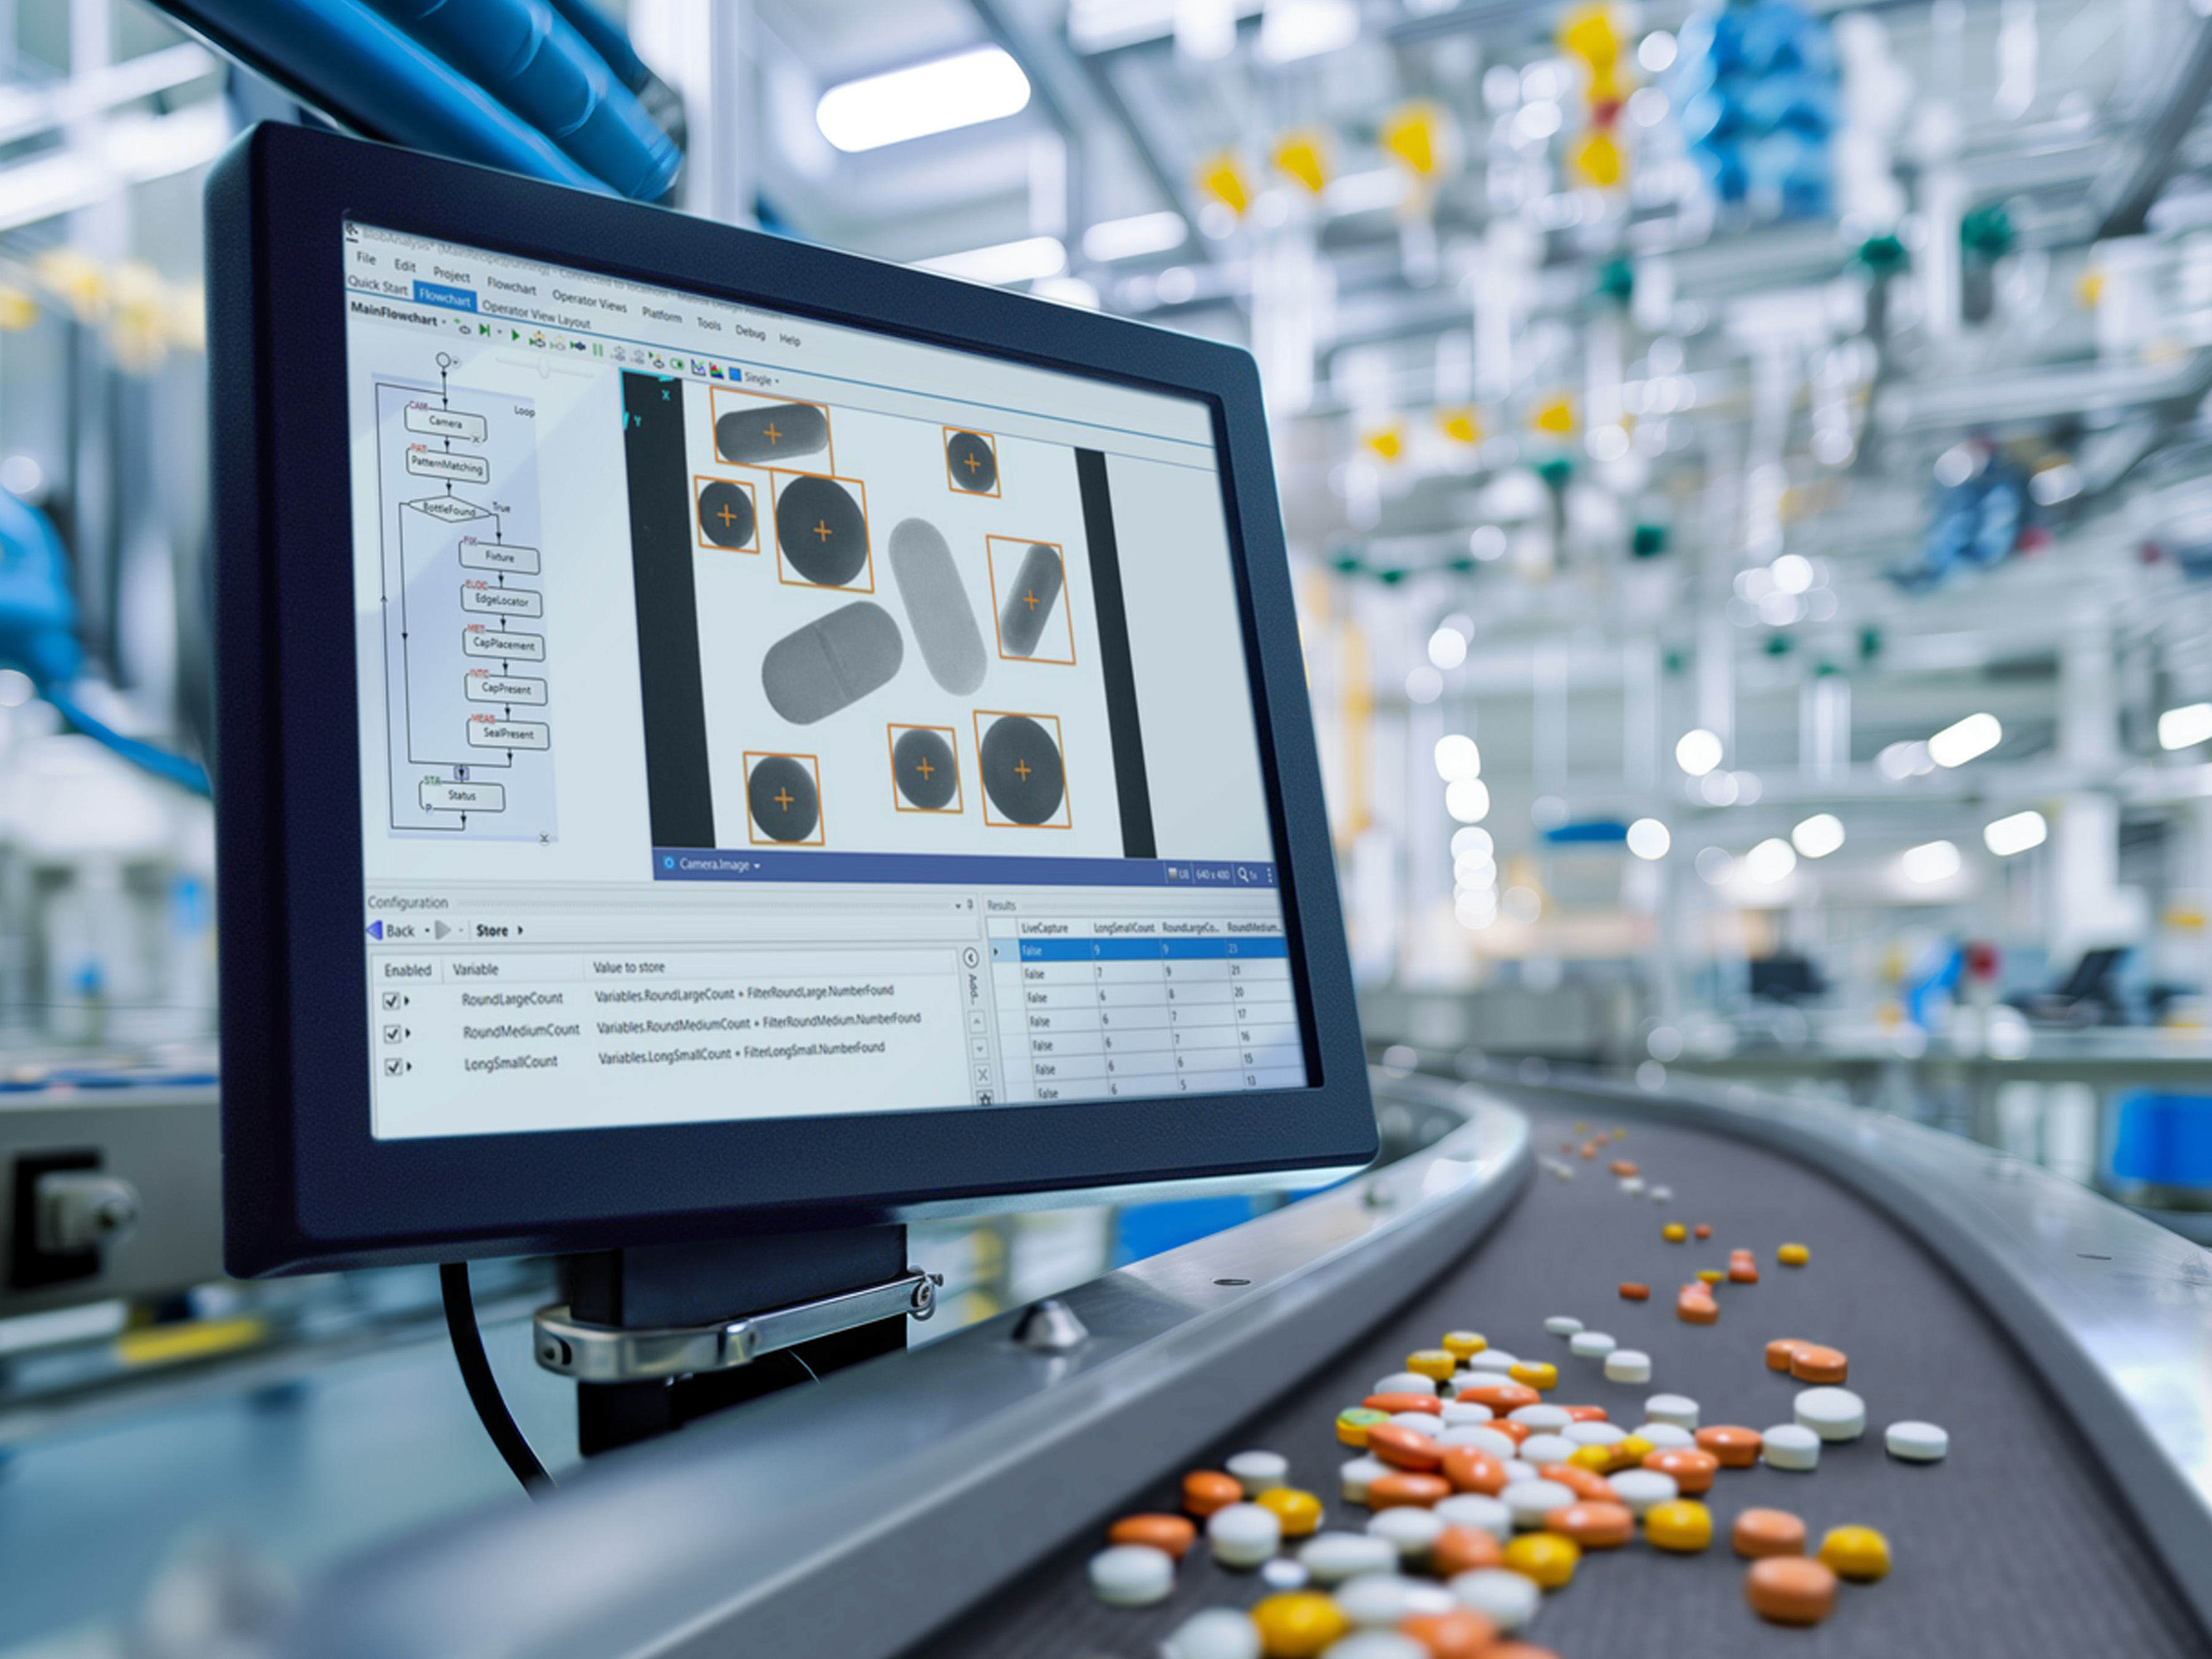 Machine vision system using machine learning and deep learning in a medication manufacturing factory.